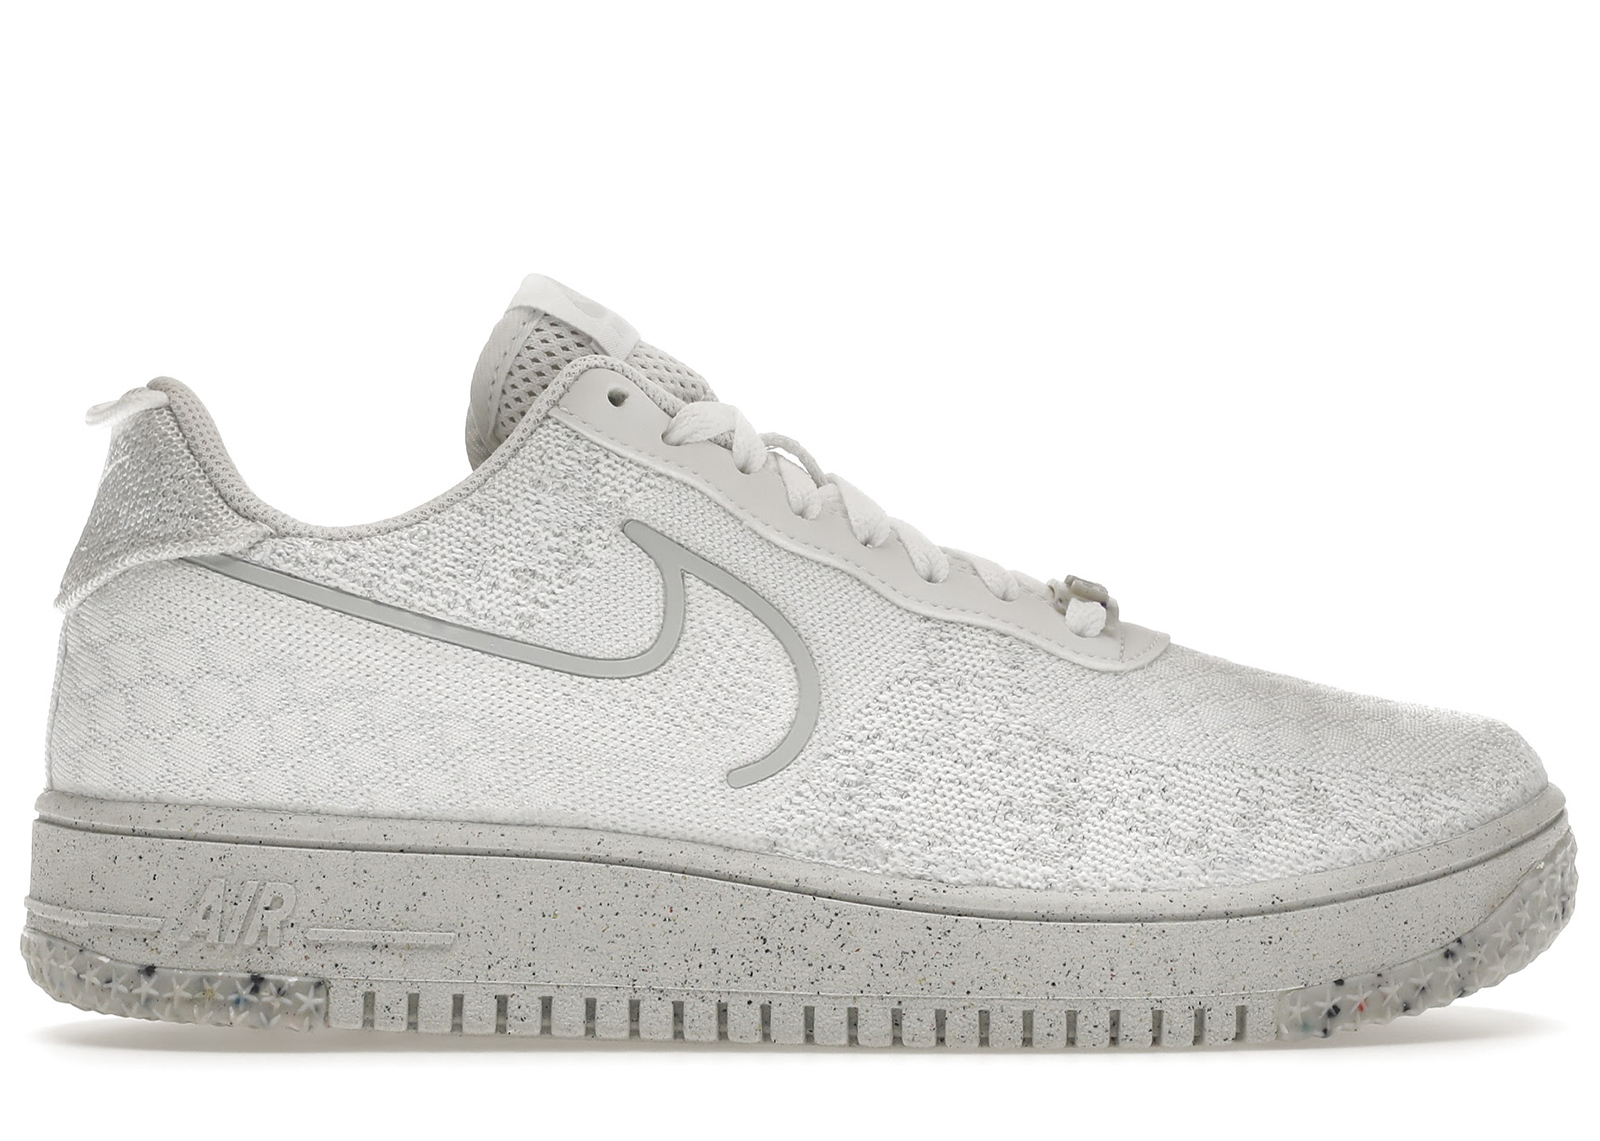 Nike Air Force 1 Low Crater Flyknit White Platinum Tint Men's